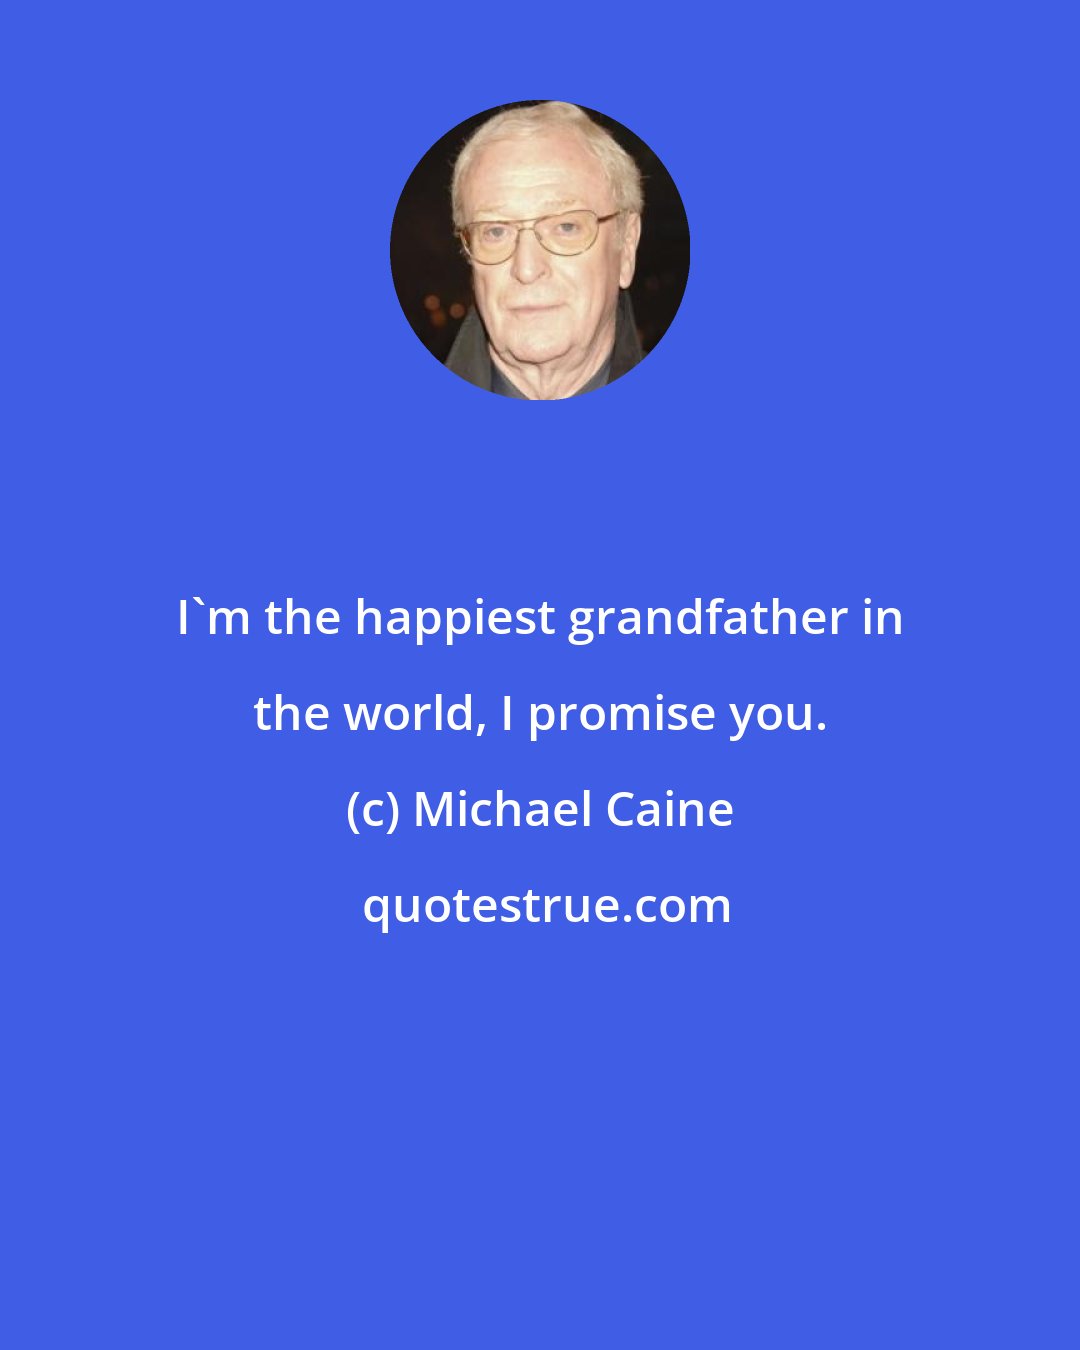 Michael Caine: I'm the happiest grandfather in the world, I promise you.